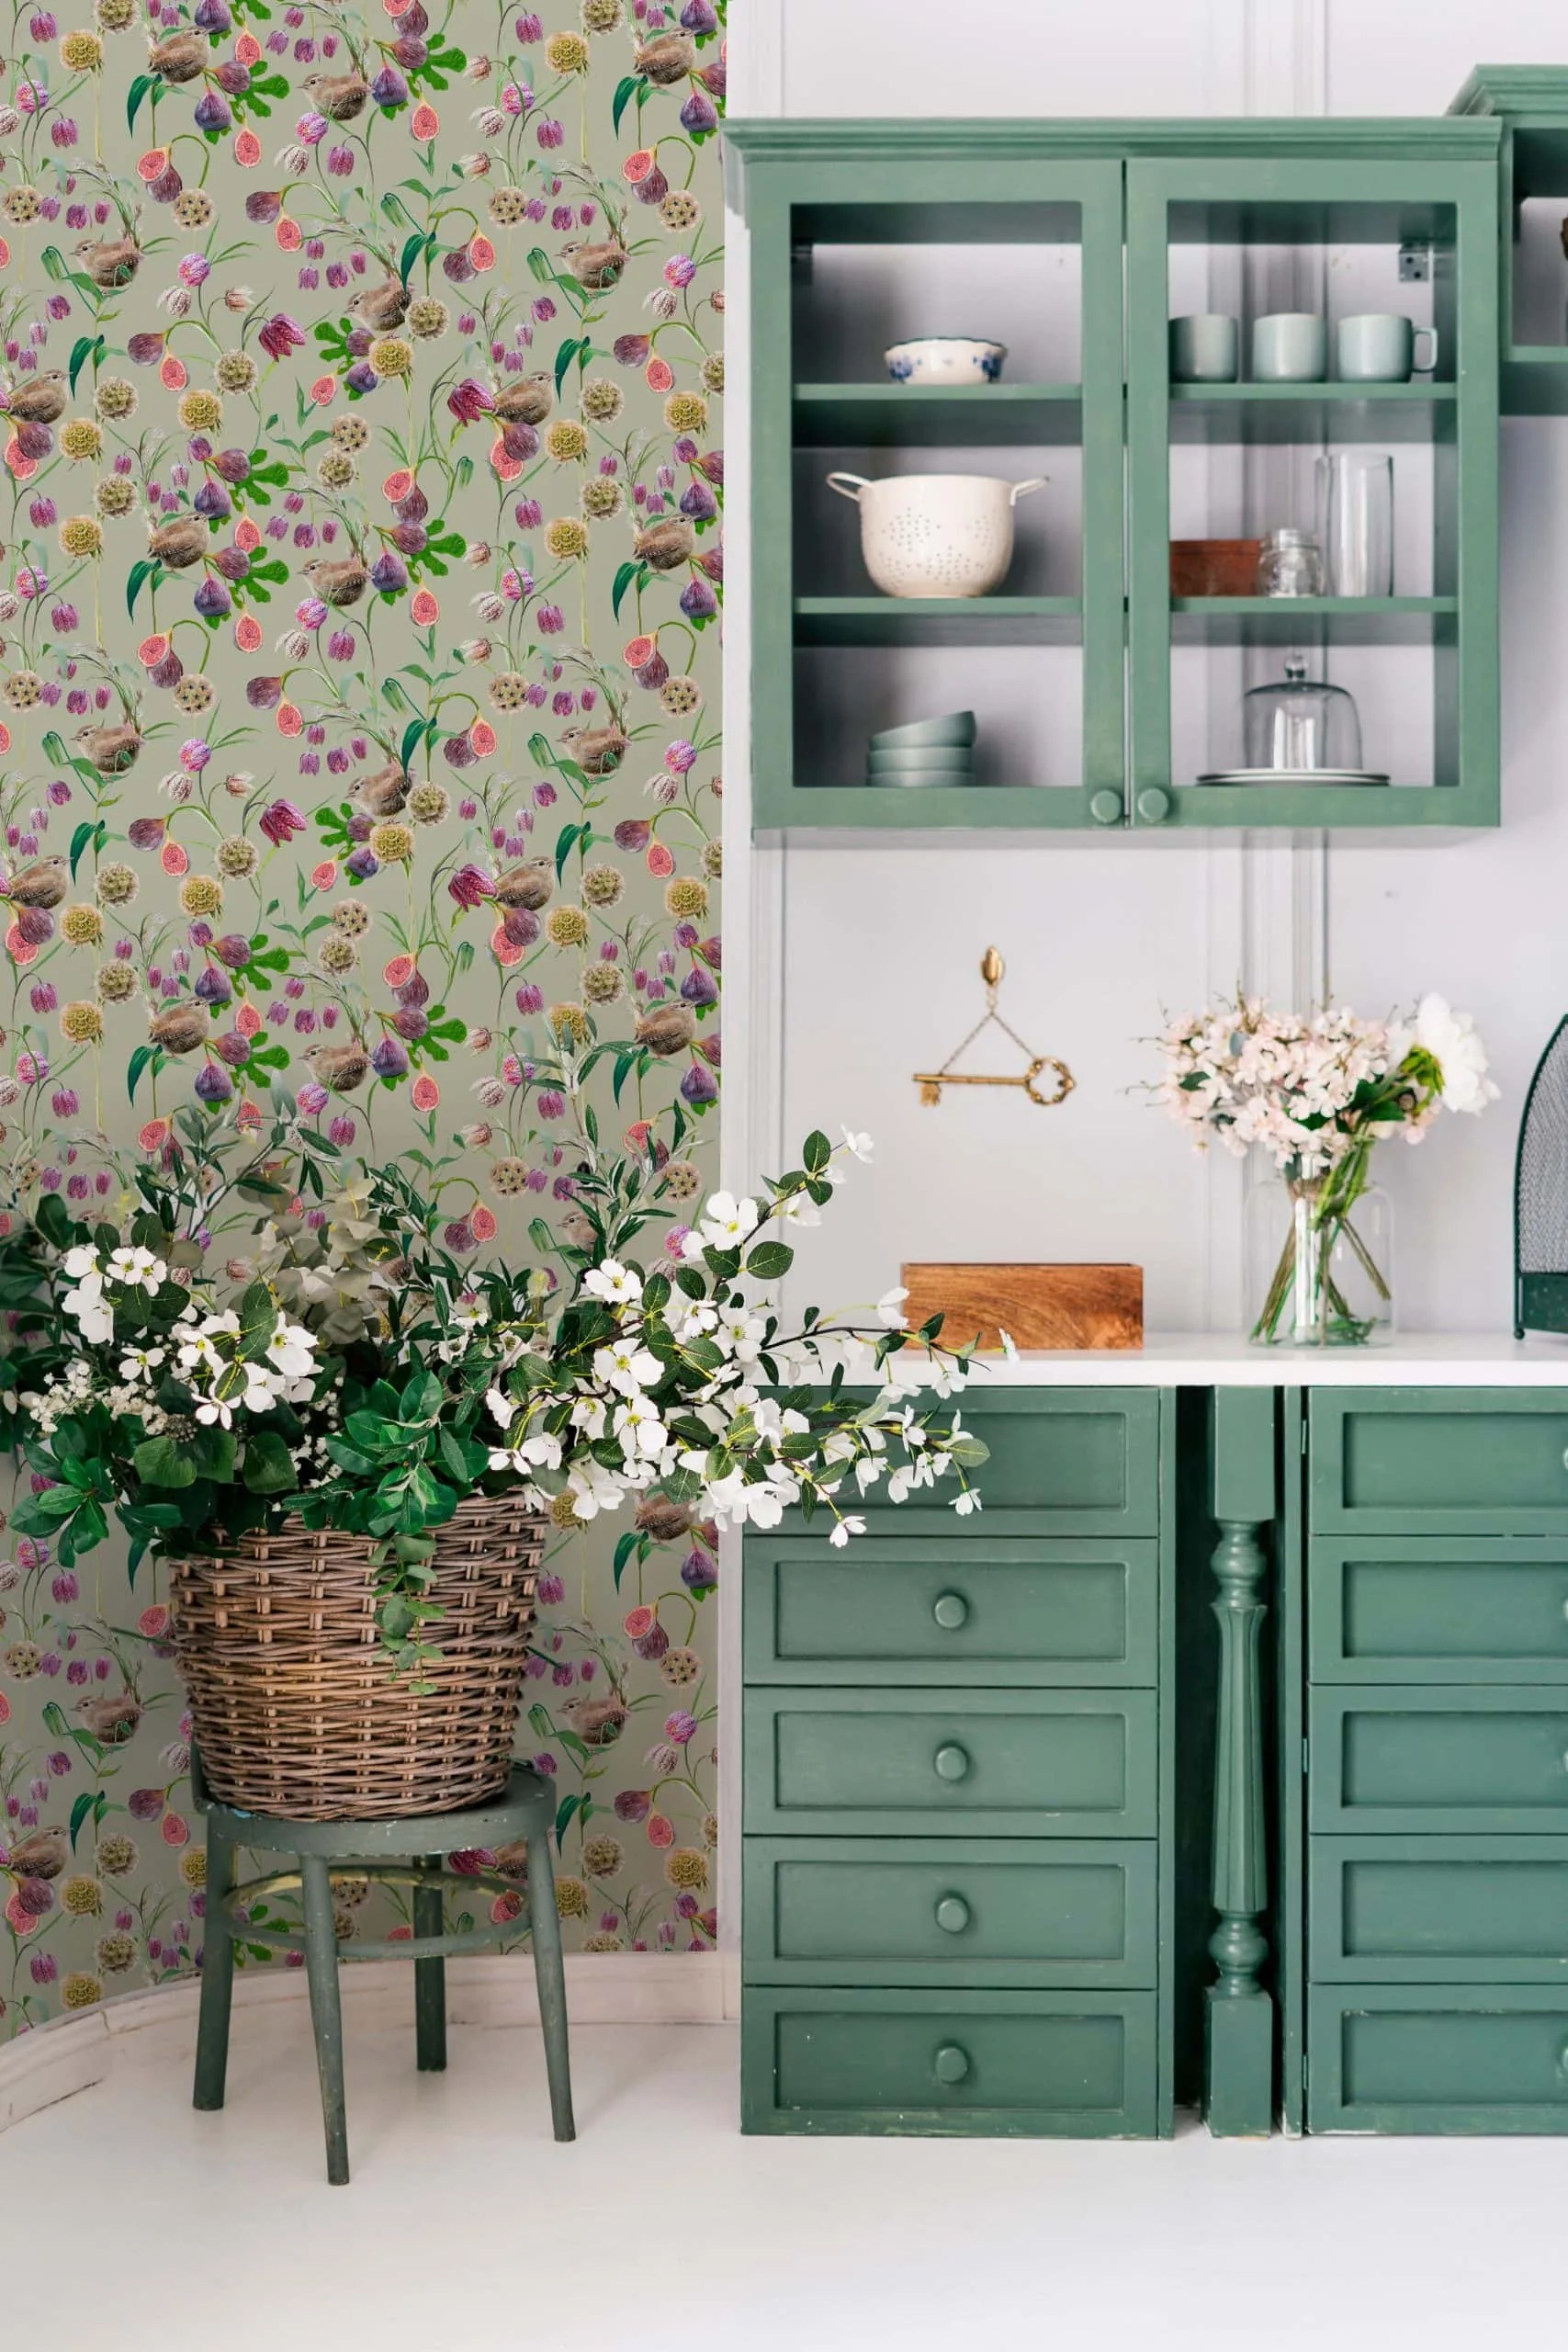 The 15 Best Flowery Wallpaper Ideas to Update your Home for Spring